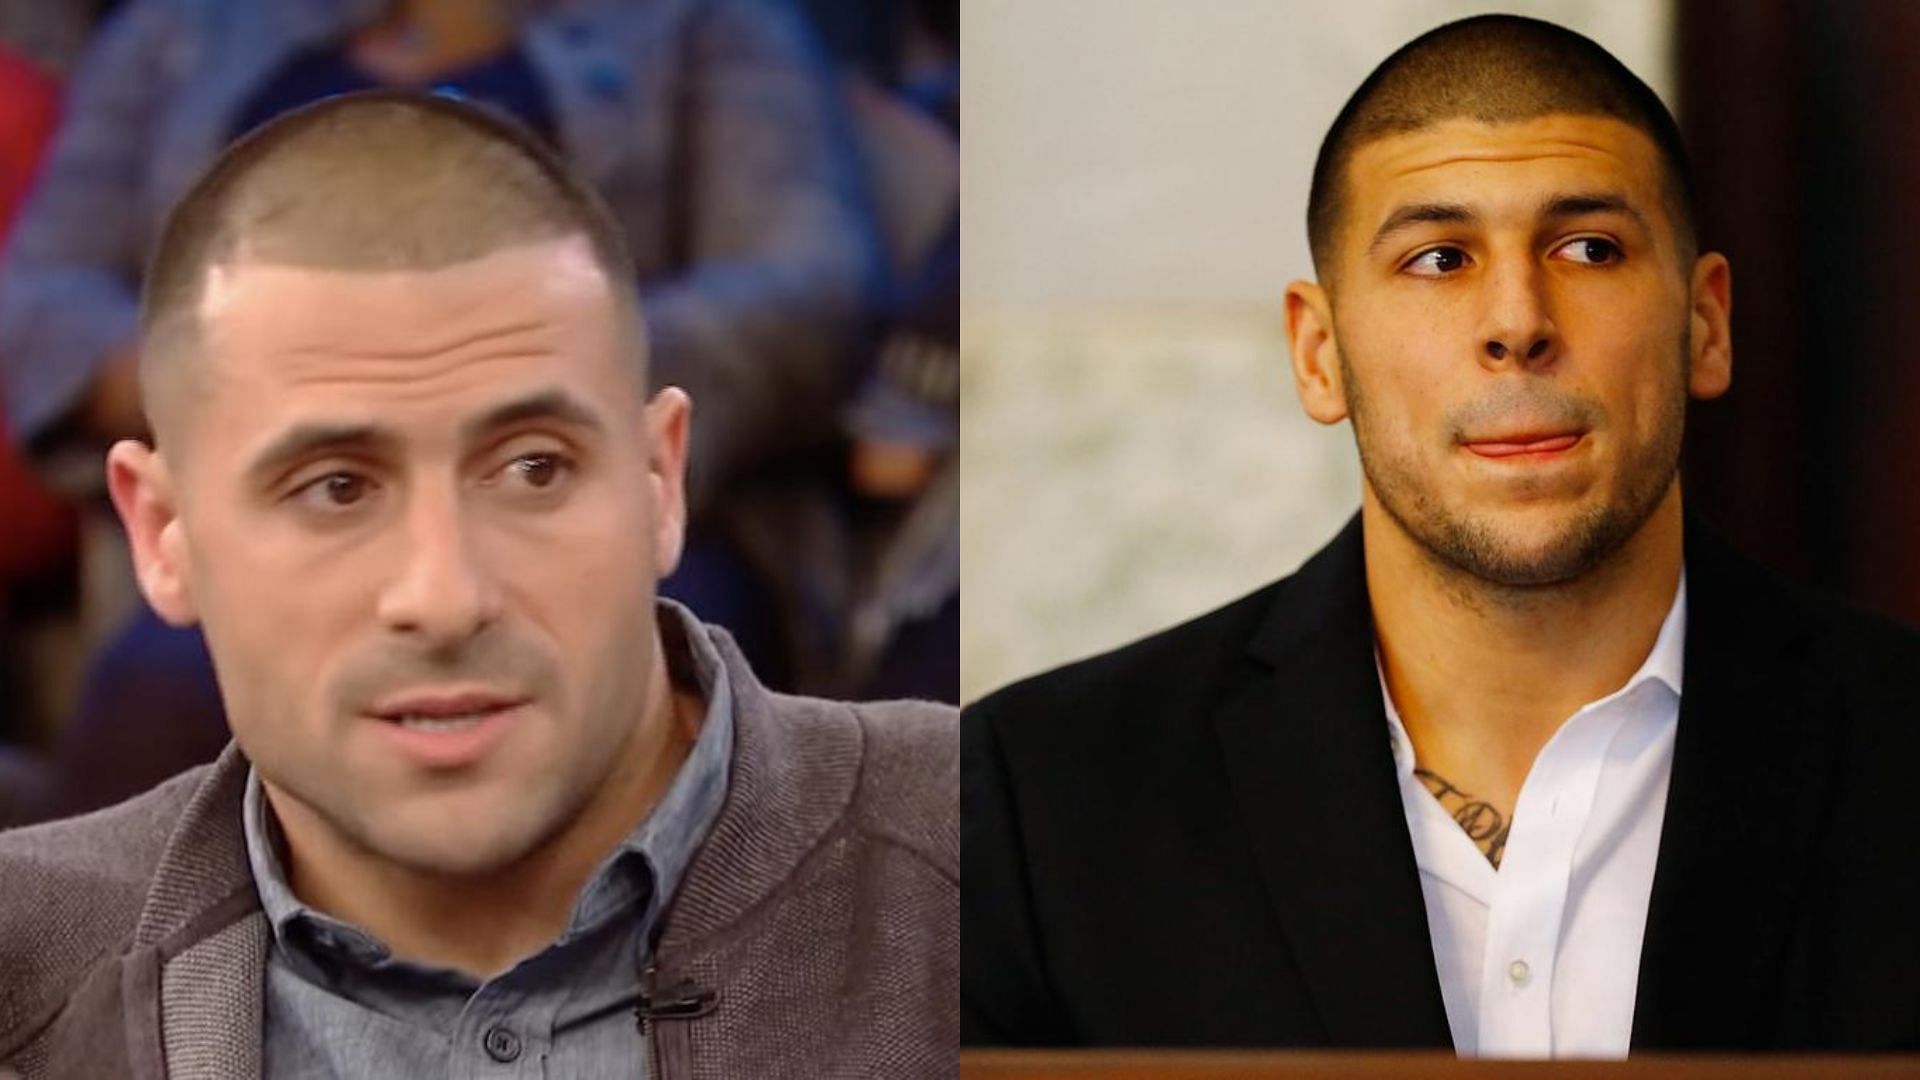 DJ Hernandez (L), the older brother of the late NFL TE Aaron Hernandez (R), was arrested for role in shootings